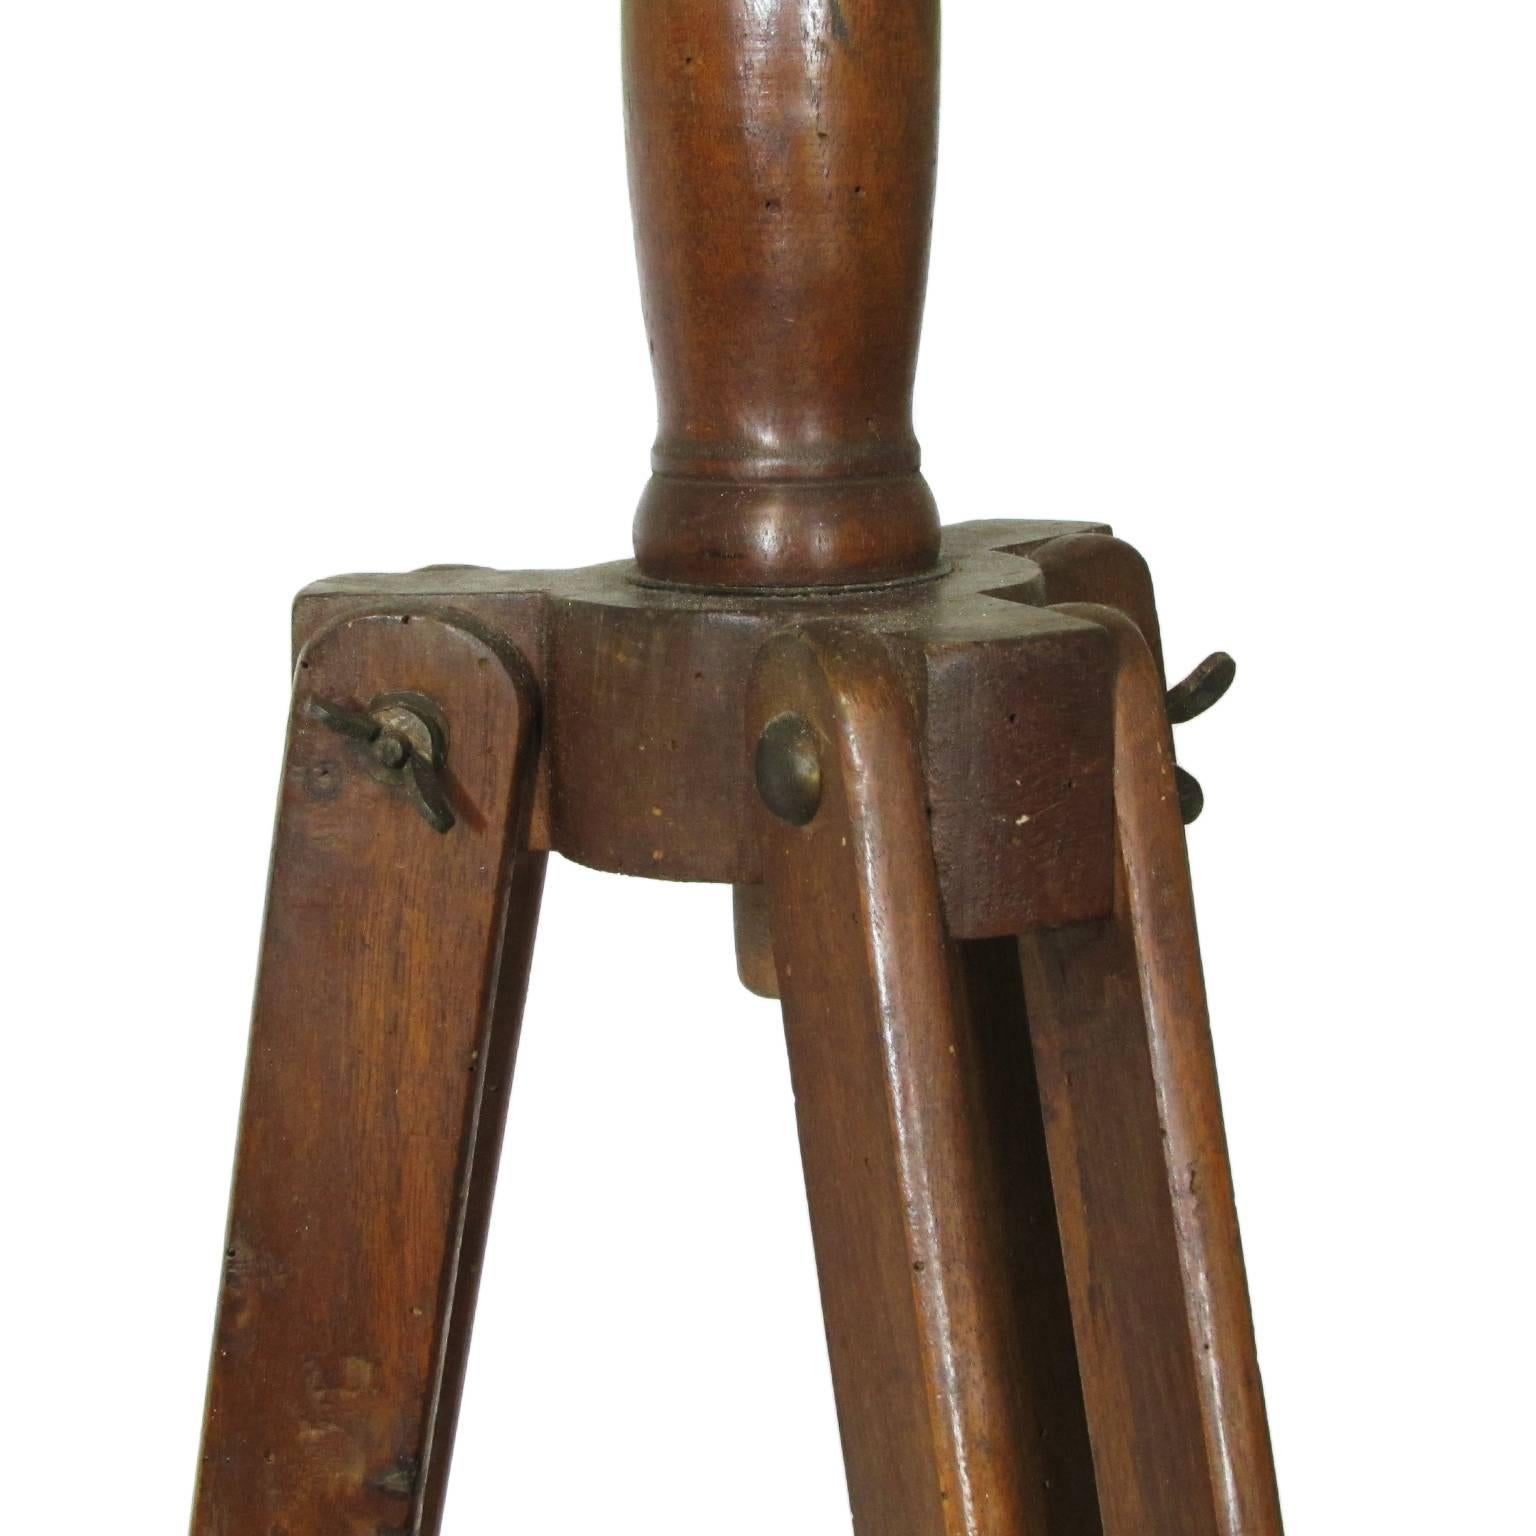 English 19th Century Astronomical Telescope in Brass on Wooden Tripod 2